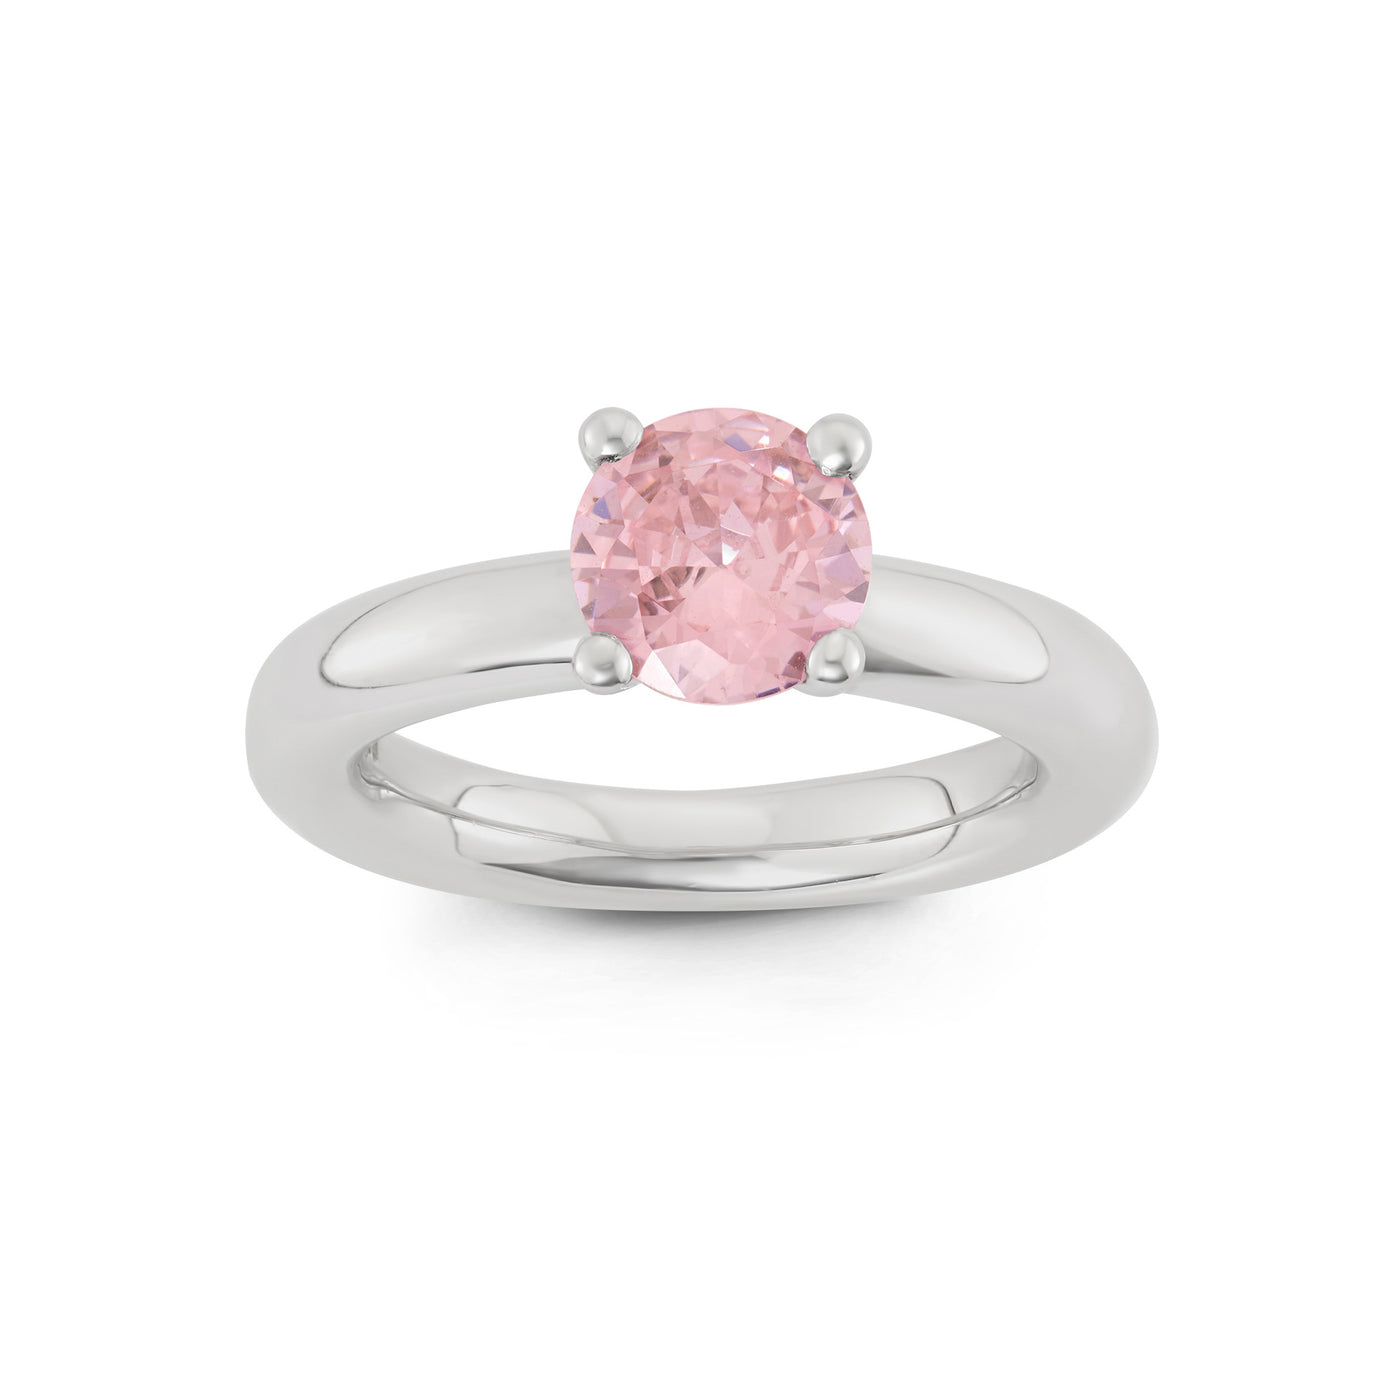 Rebecca Sloane Silver Ring With Facet Pink Round CZ Center Stone